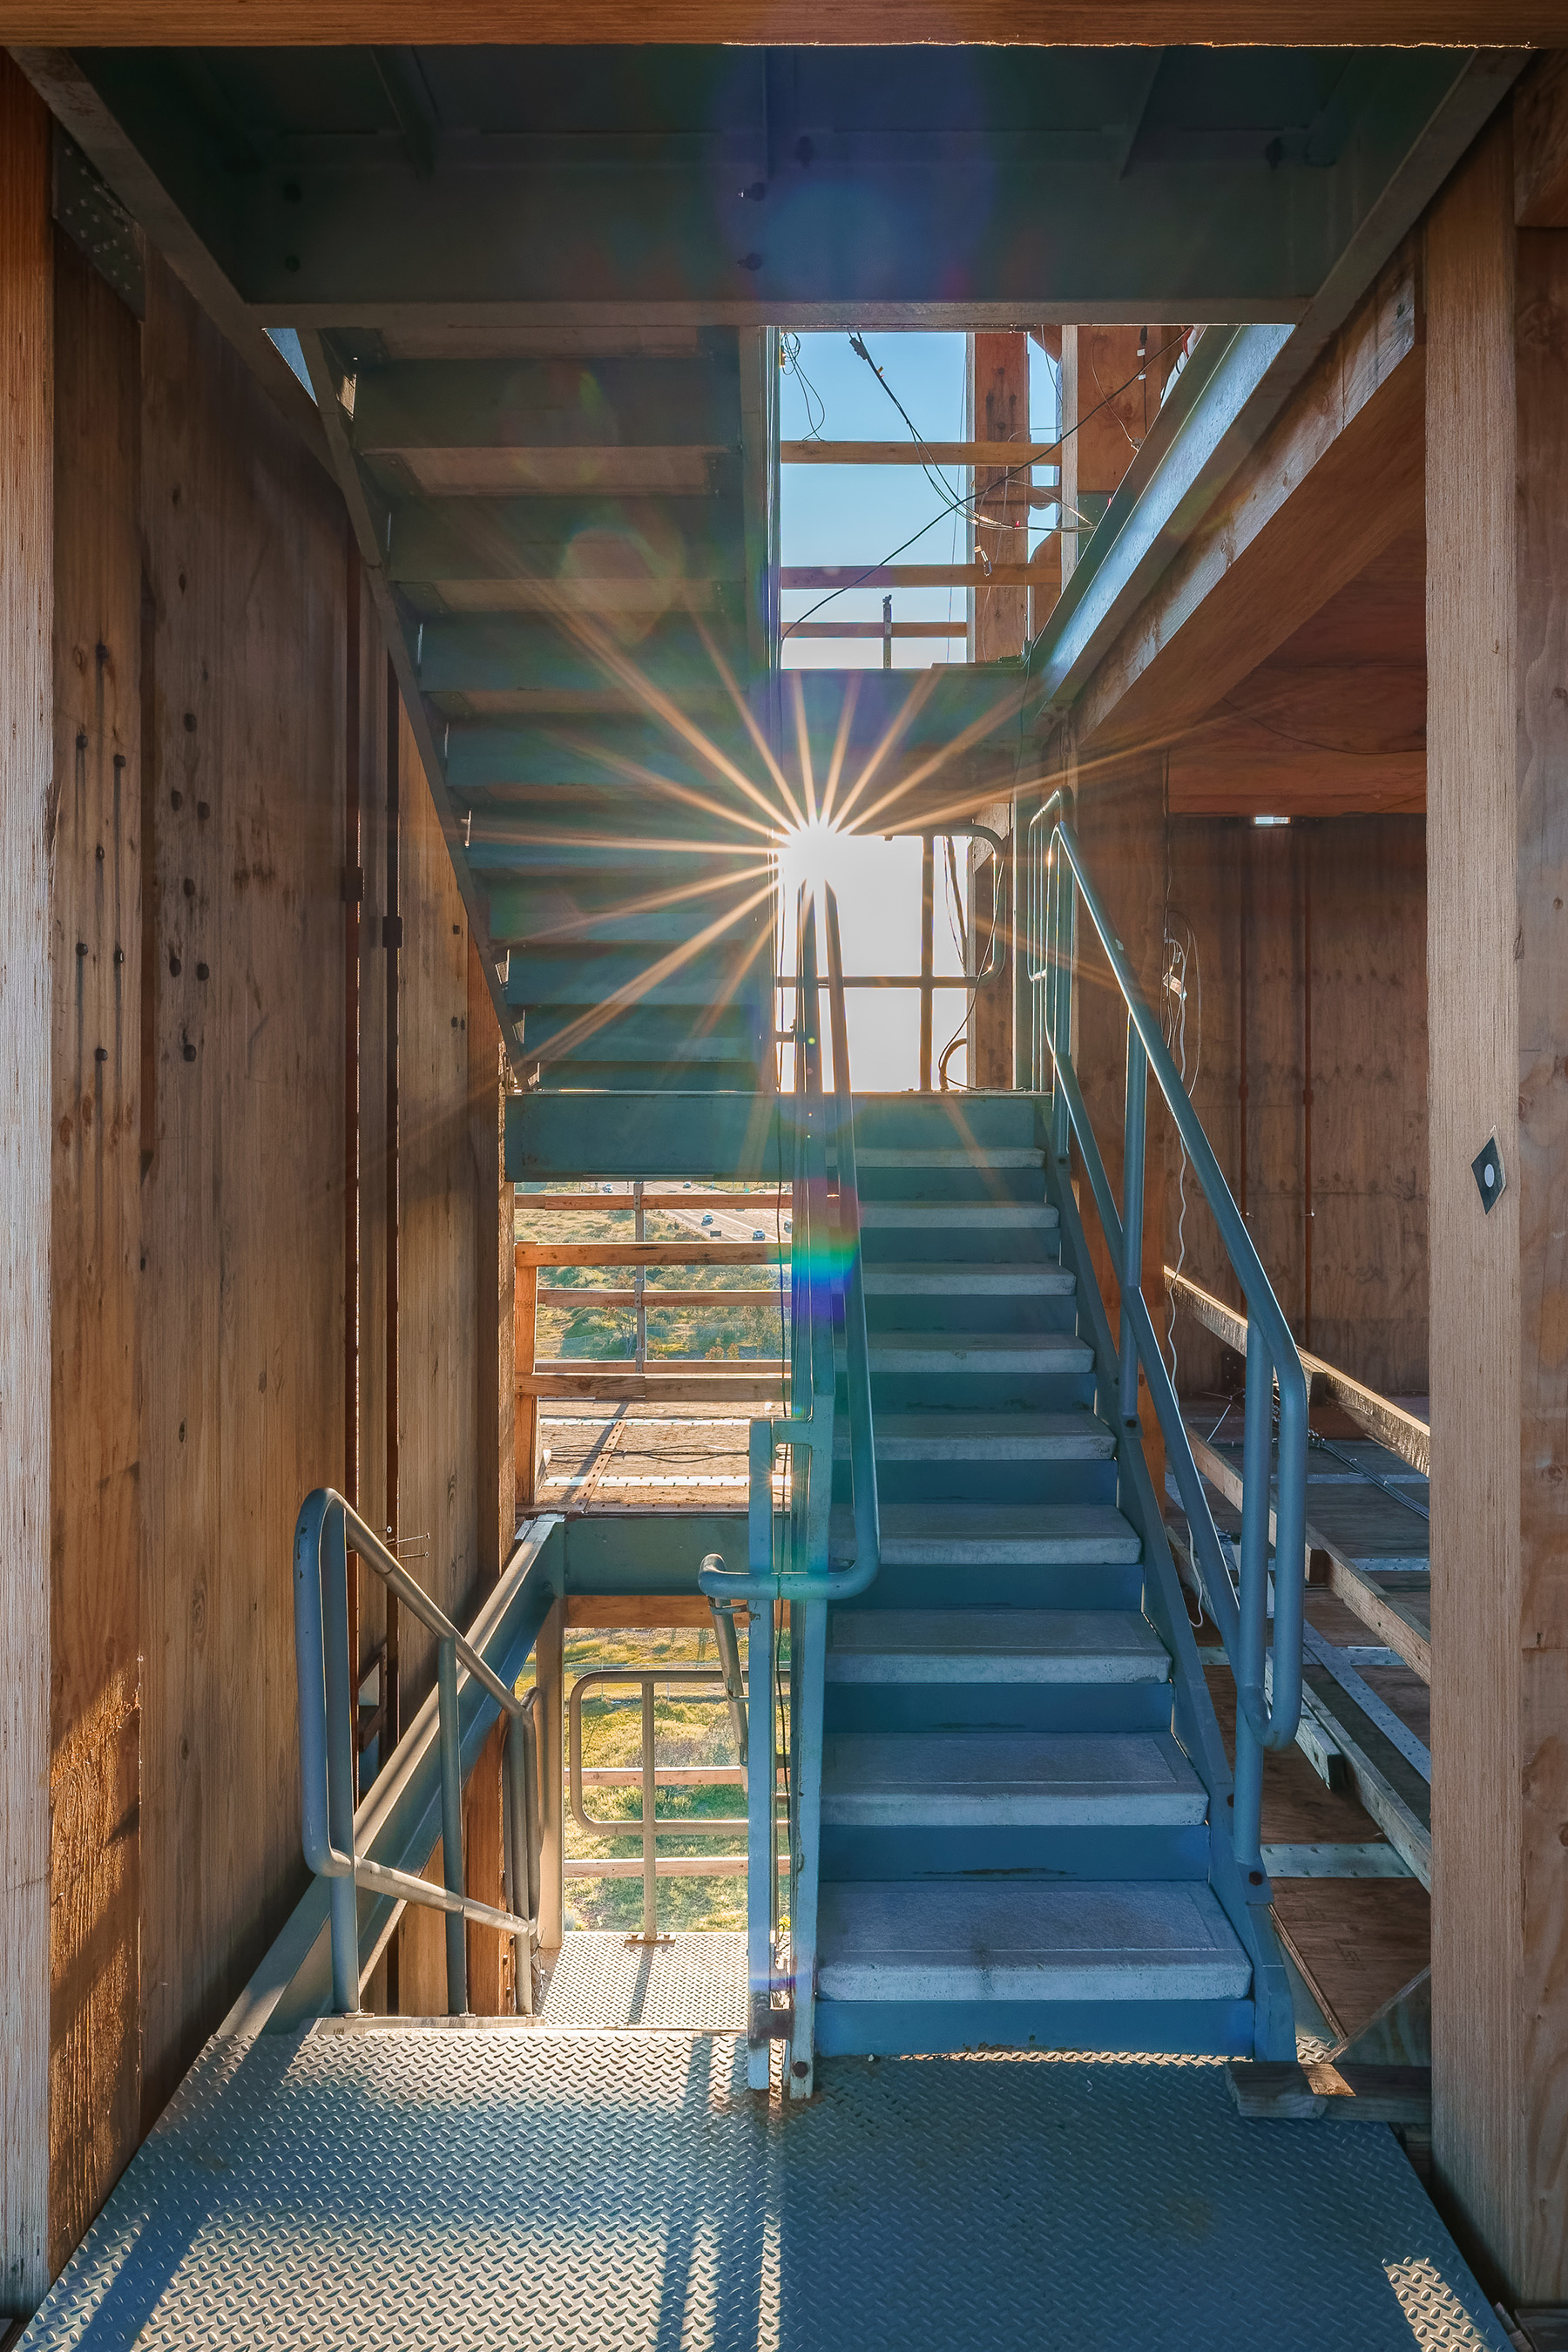 A blue staircase sits inside a wooden structure.